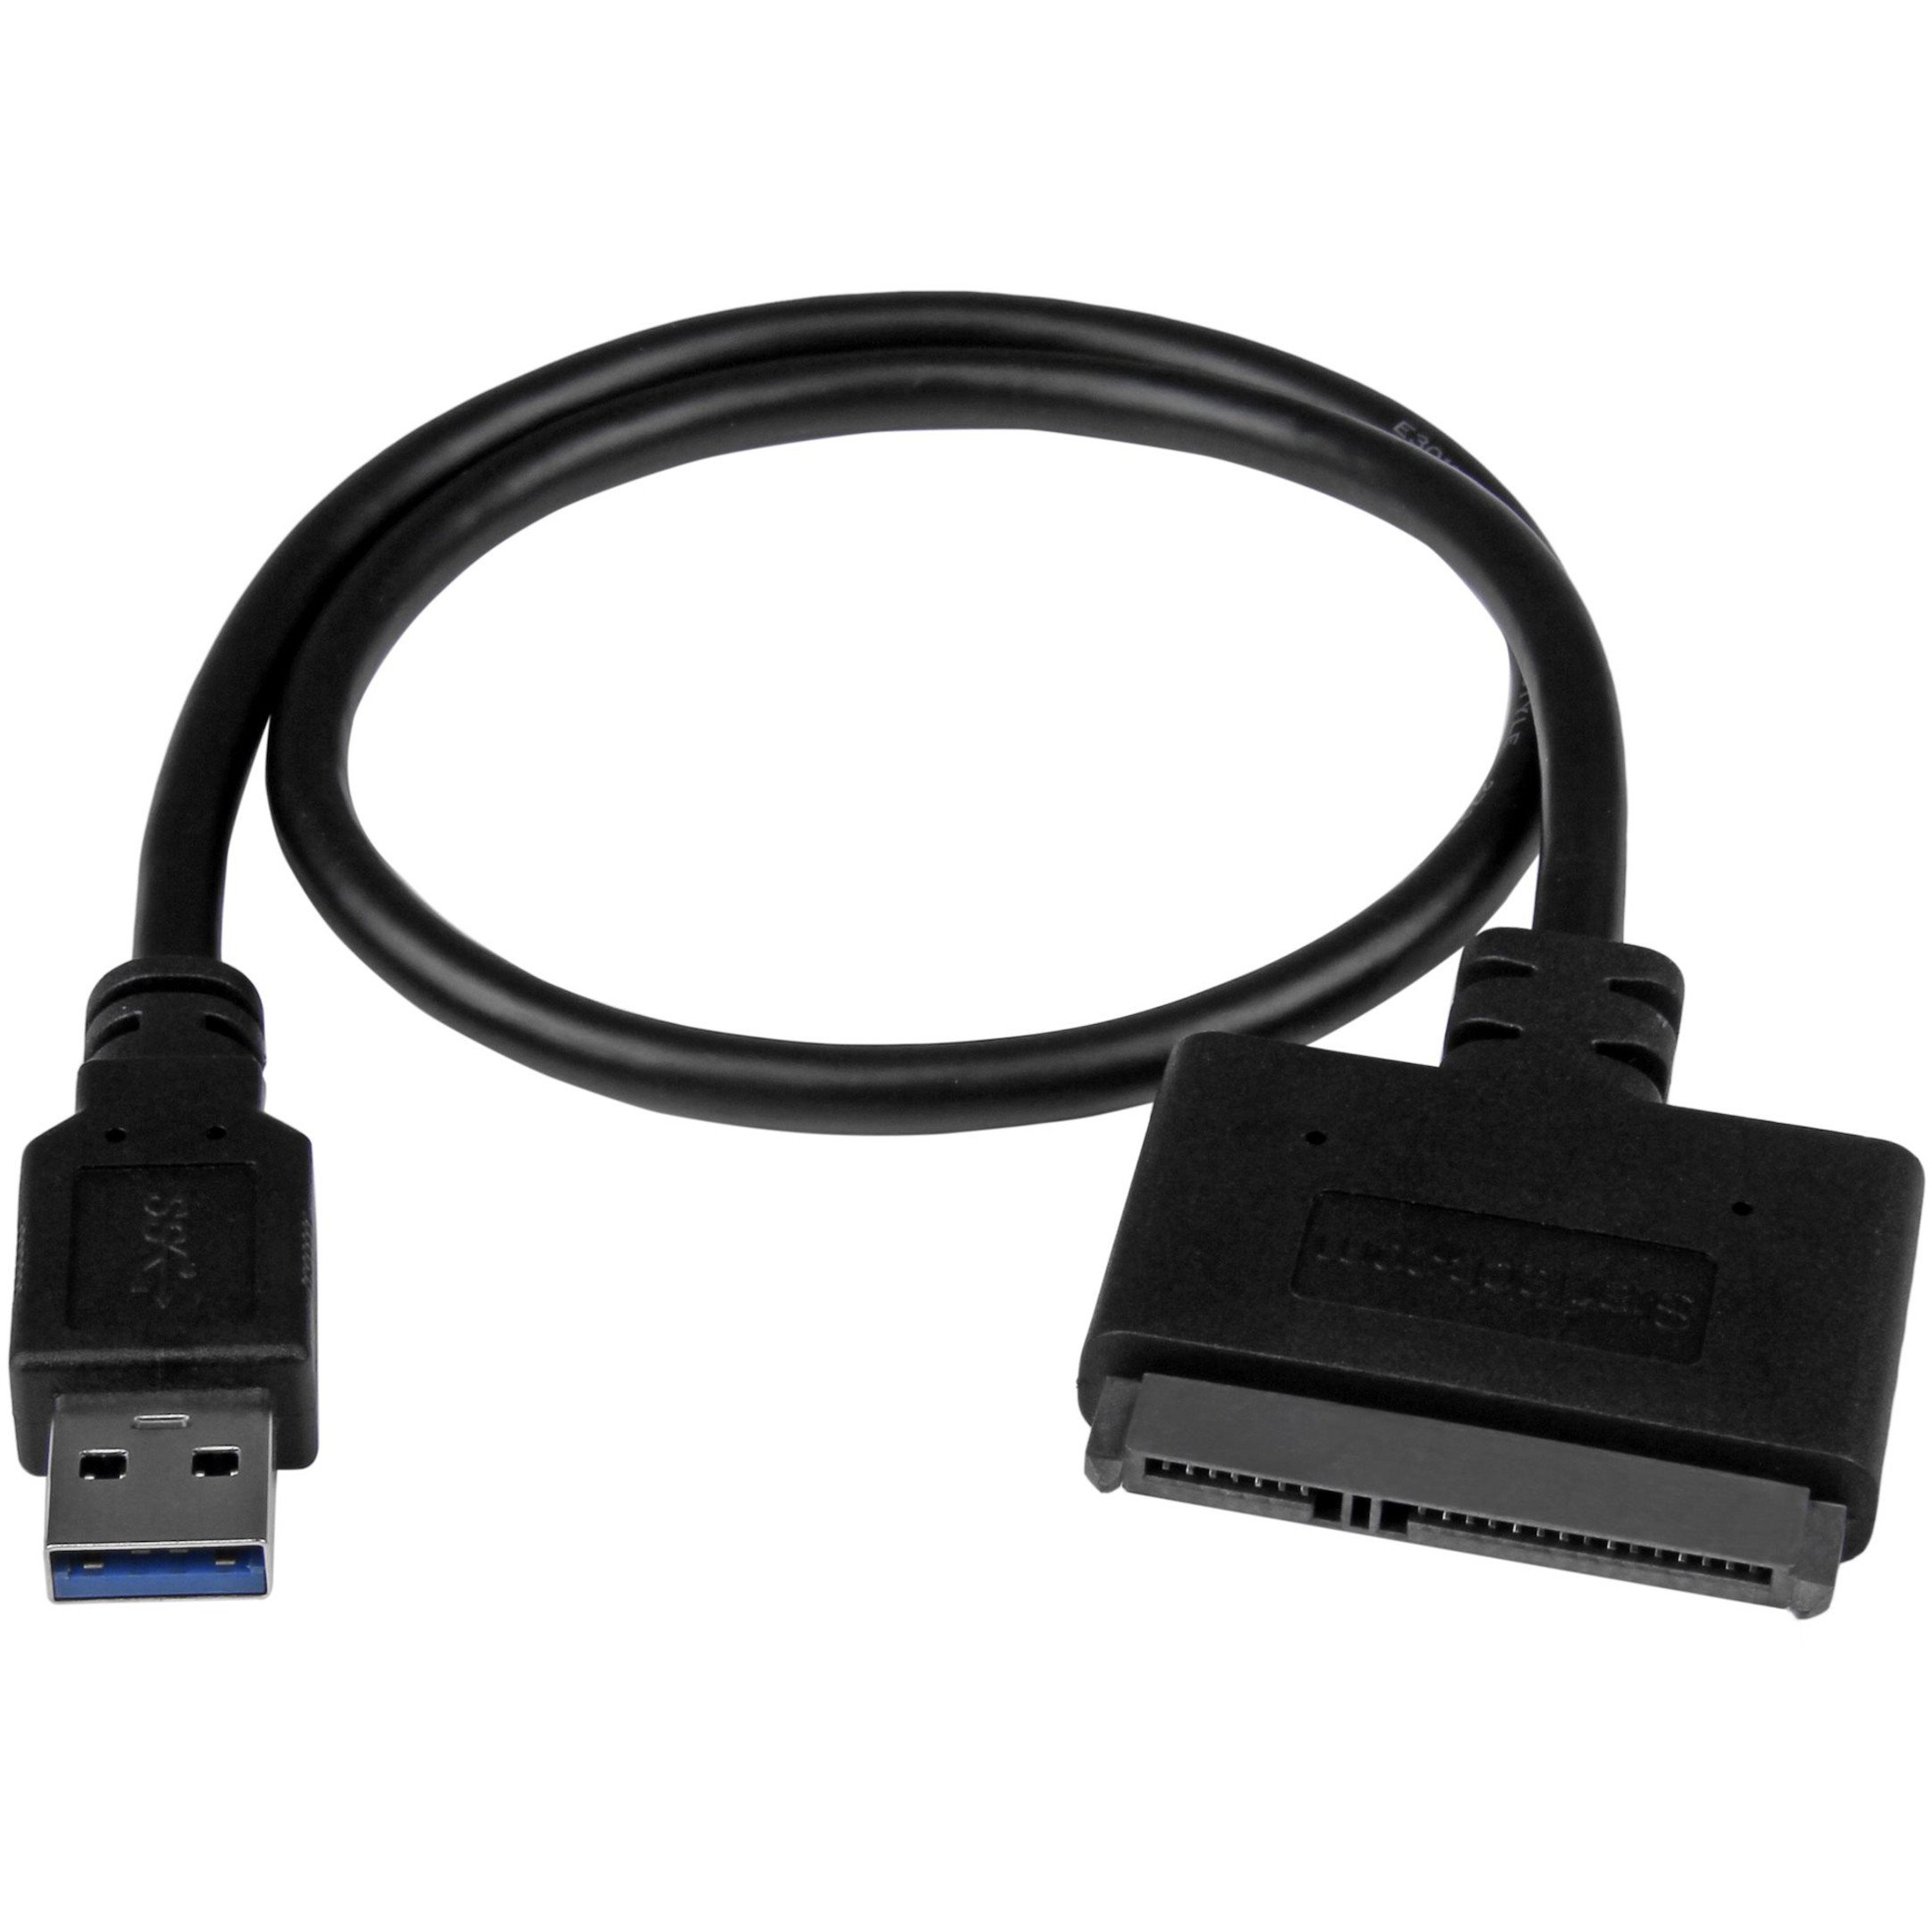 nødvendighed Pigment udstilling Startech .com USB 3.1 (10Gbps) Adapter Cable for 2.5" SATA SSD/HDD  DrivesConnect a 2.5" SATA SSD/HDD to your computer using this USB 3.1...  USB312SAT3CB - Corporate Armor